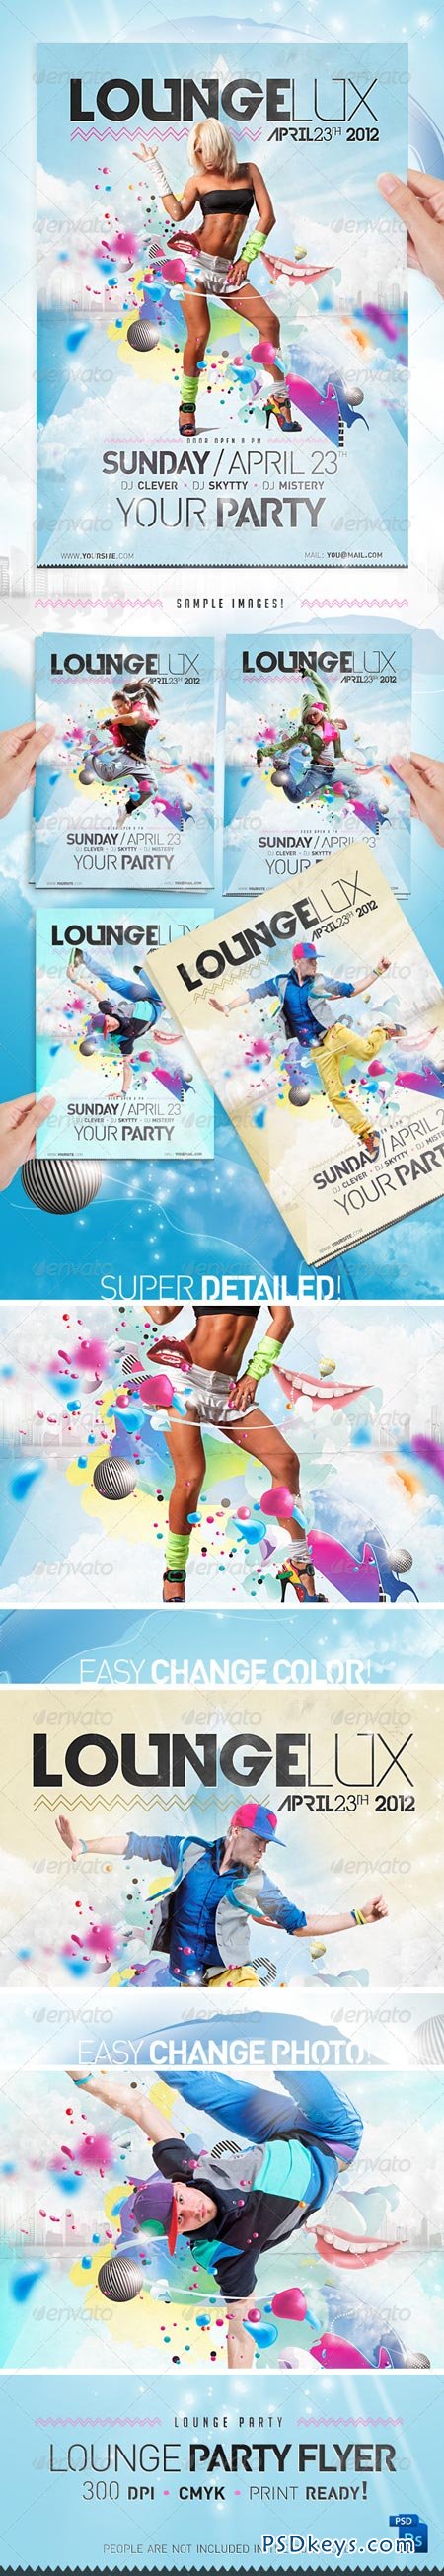 Lounge Party Flyer Template 1302898